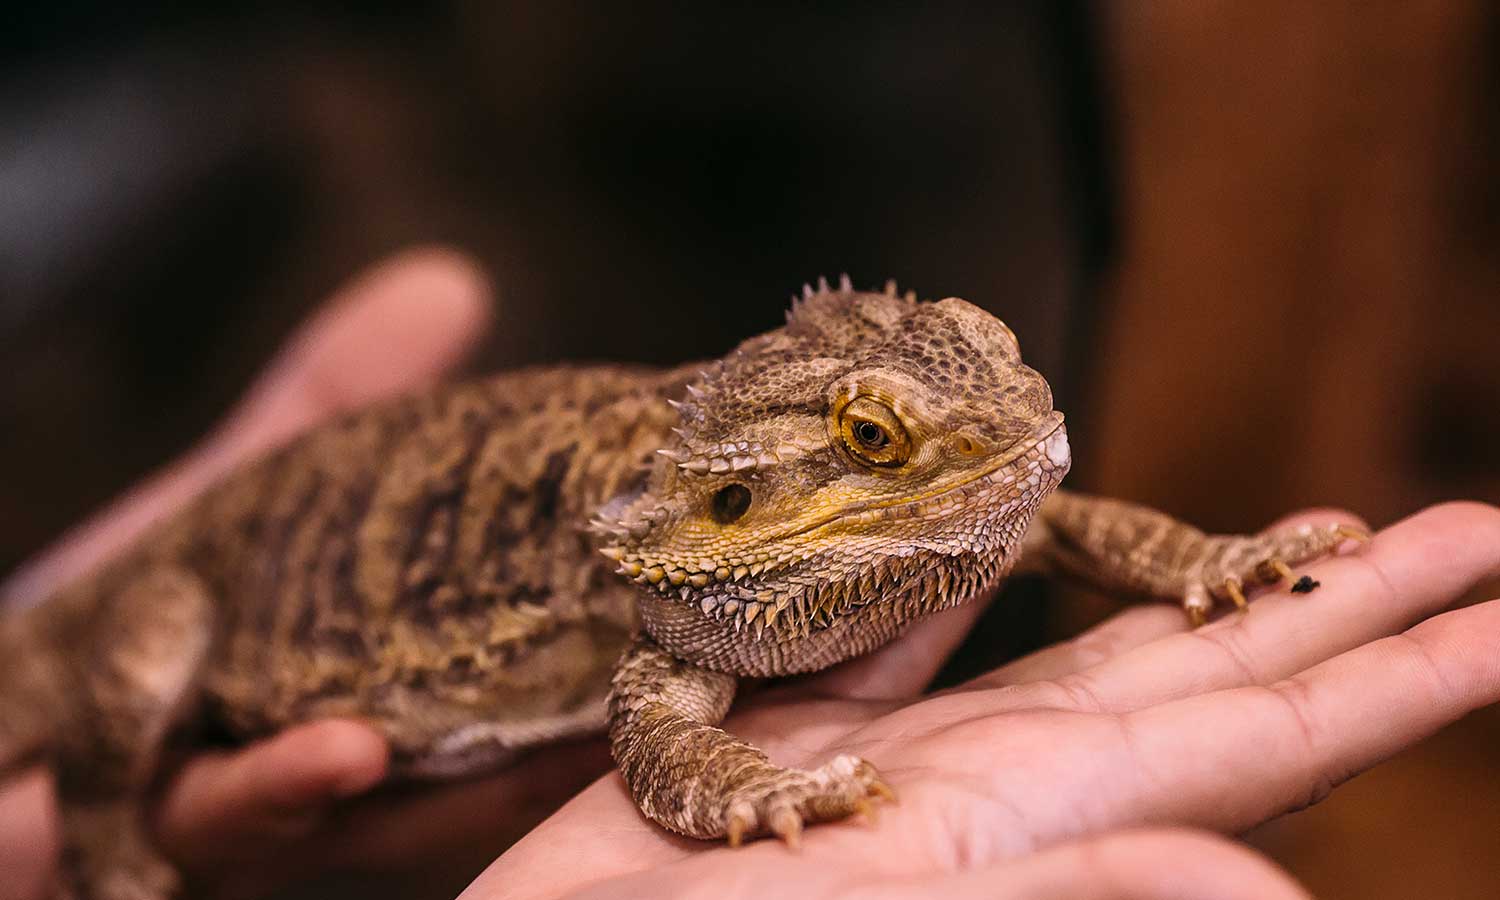 A horned toad being held